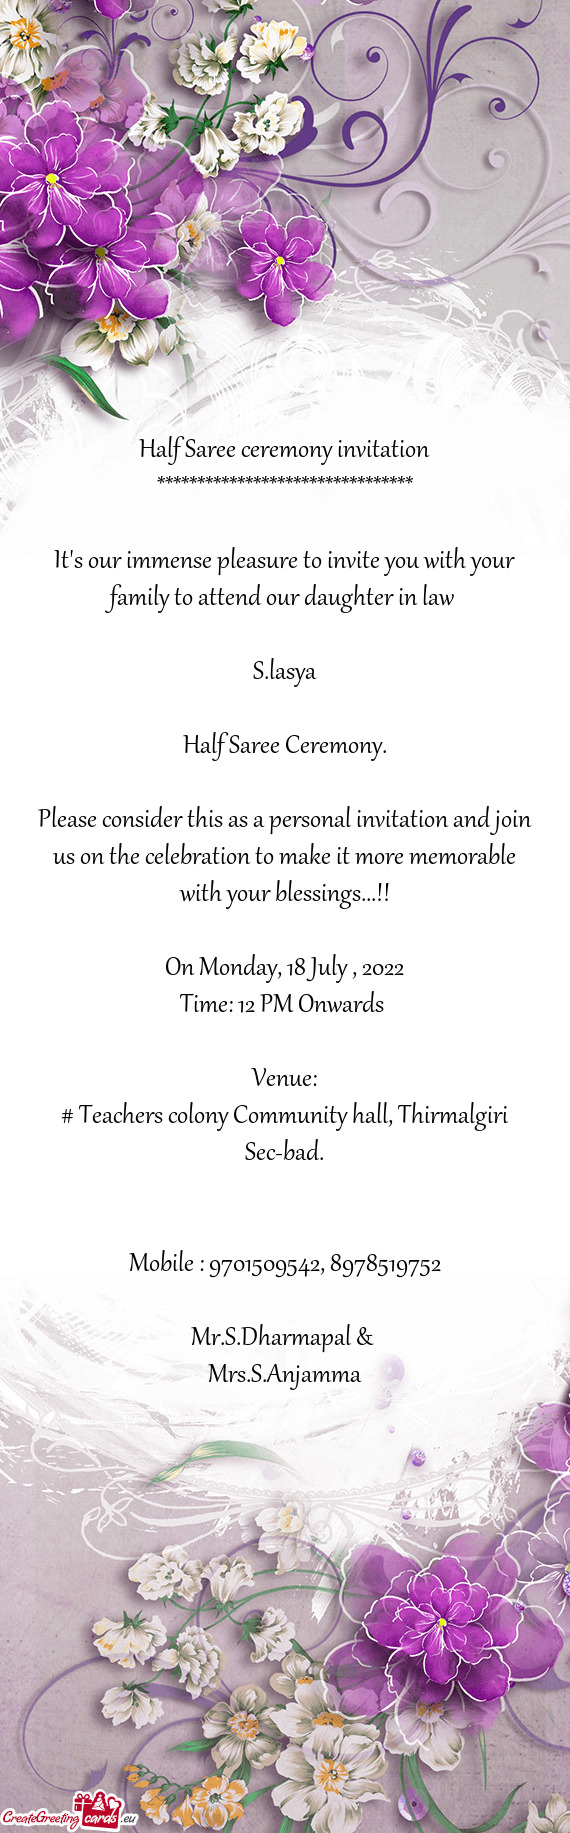 It's our immense pleasure to invite you with your family to attend our daughter in law